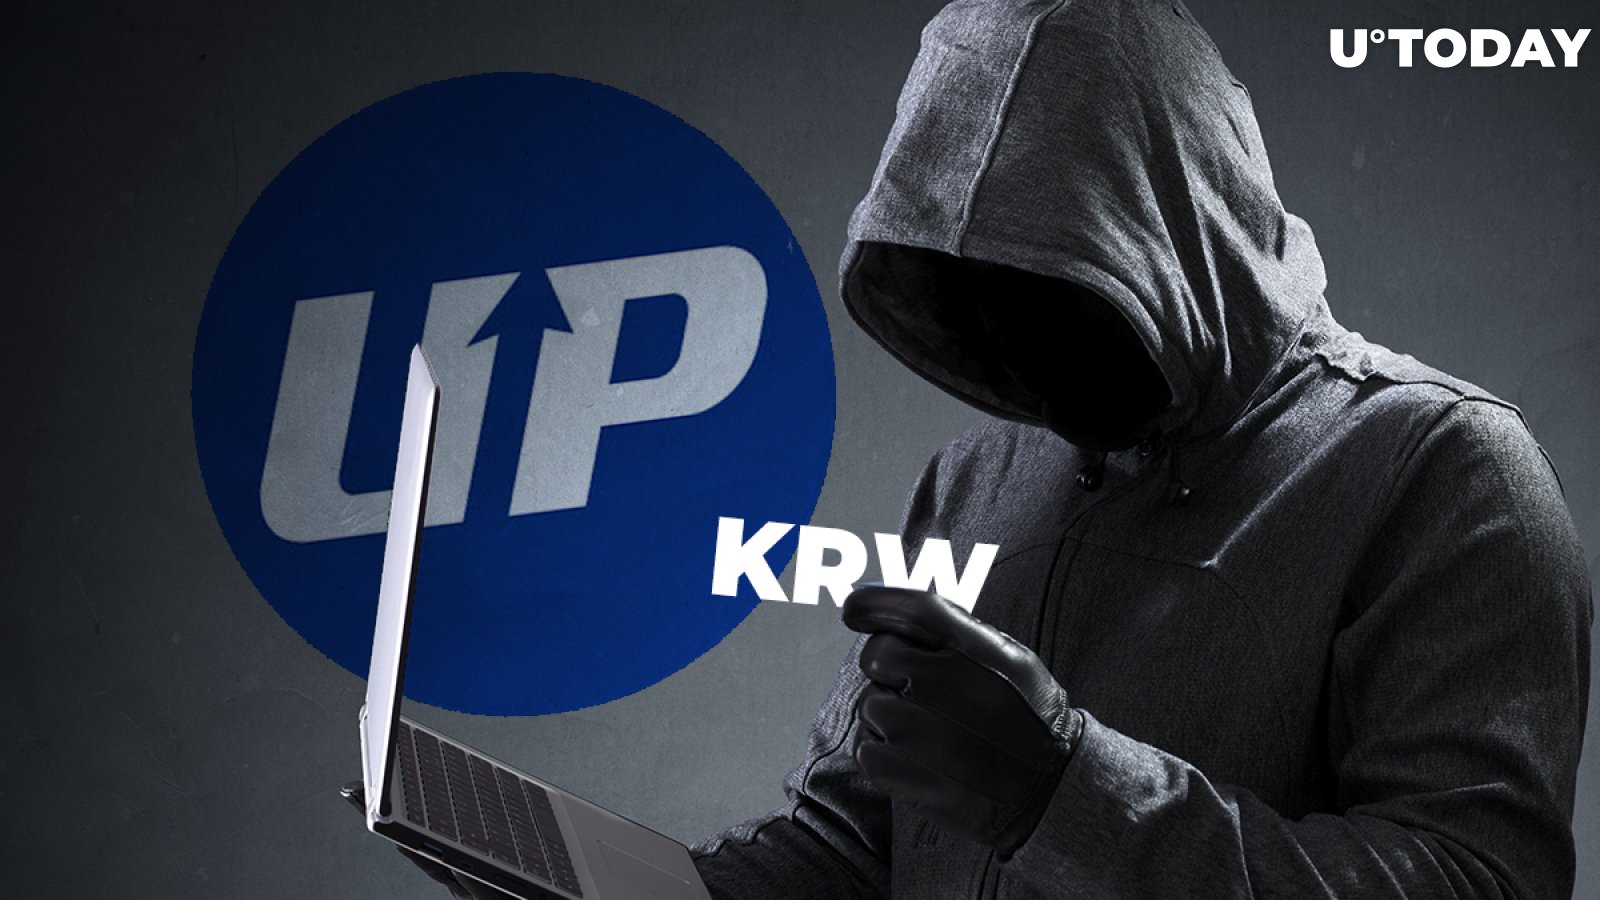 UpBit Crypto Exchange Suffers Hack with 60 Bln KRW Lost in Crypto